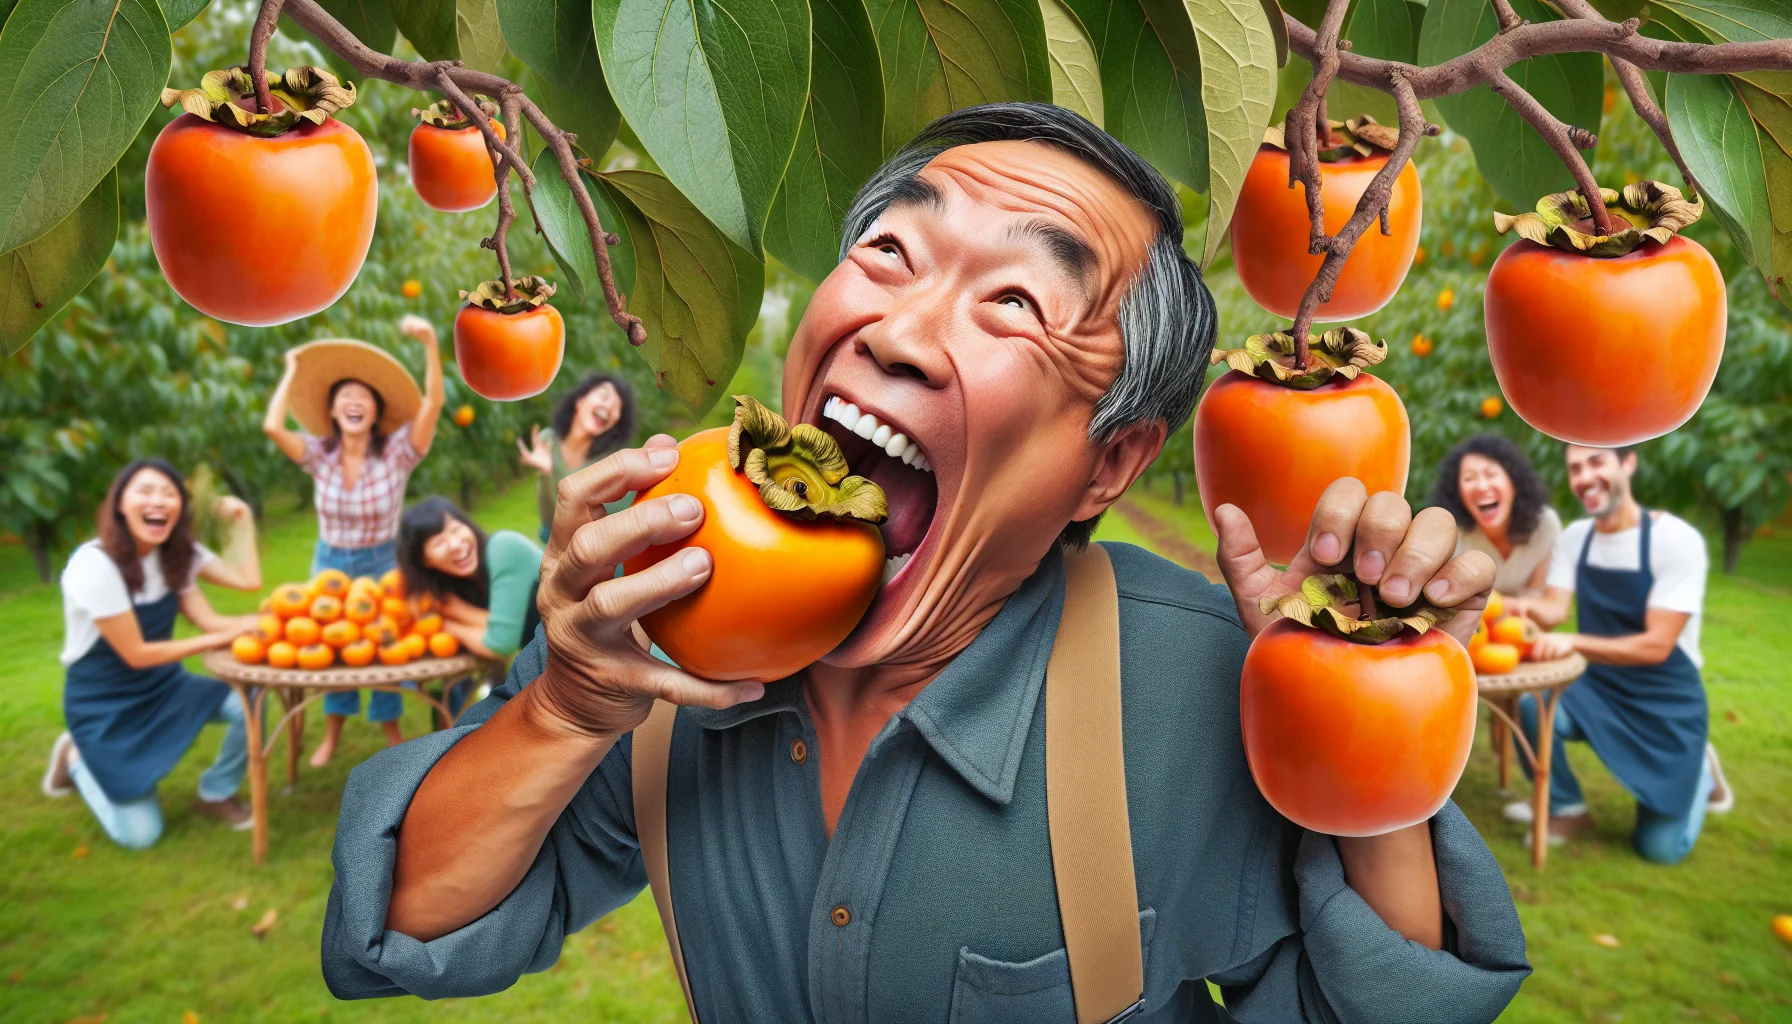 Compose an image of a playful scenario in a lush garden. Display an Asian man joyfully biting into a ripe persimmon, the juice overflowing down his chin. He has a humorous expression of exuberant delight on his face, which also reveals layers of the full, luscious skin of the persimmon. Around him, ripe persimmons hang from the trees, their vivid orange color contrasting with the green foliage. The background includes people, Hispanic women, laughing and interacting, clearly enjoying their time gardening. This image portrays a funny and enticing showcase that eating persimmon skin is both possible and appetizing.